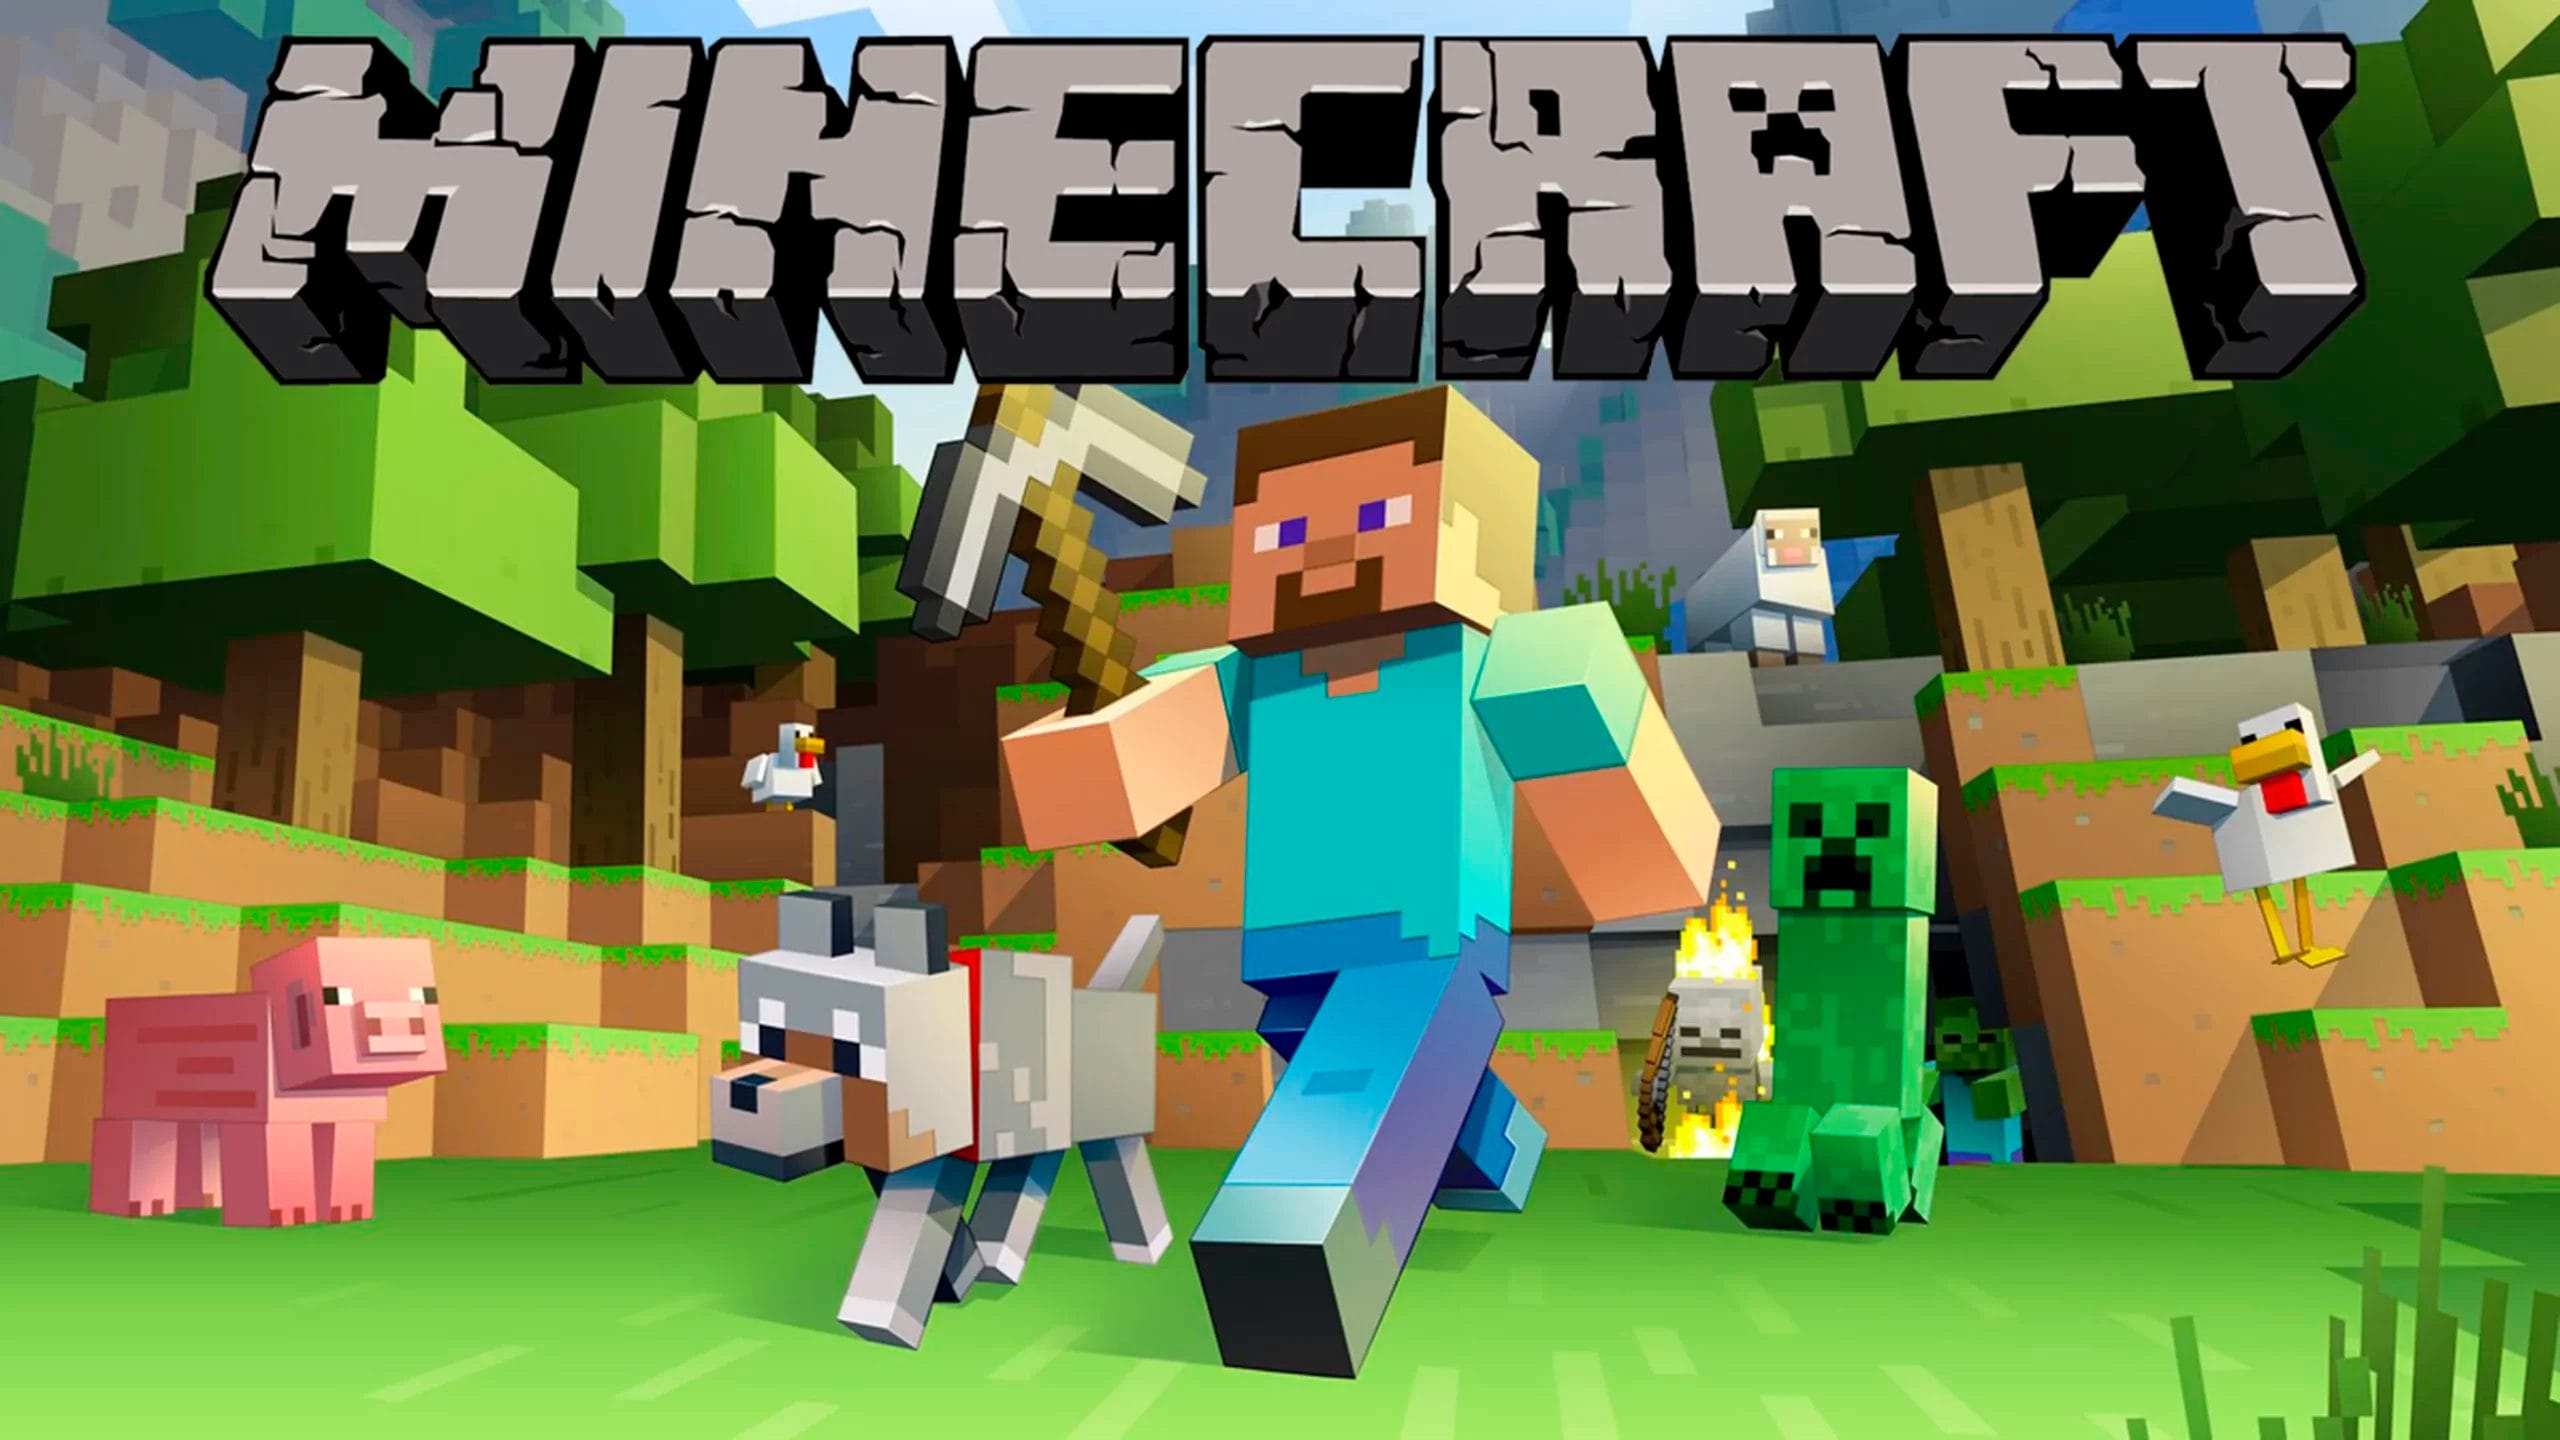 guia-todos-trucos-consejos-minecraft.sold-300-million-scaled